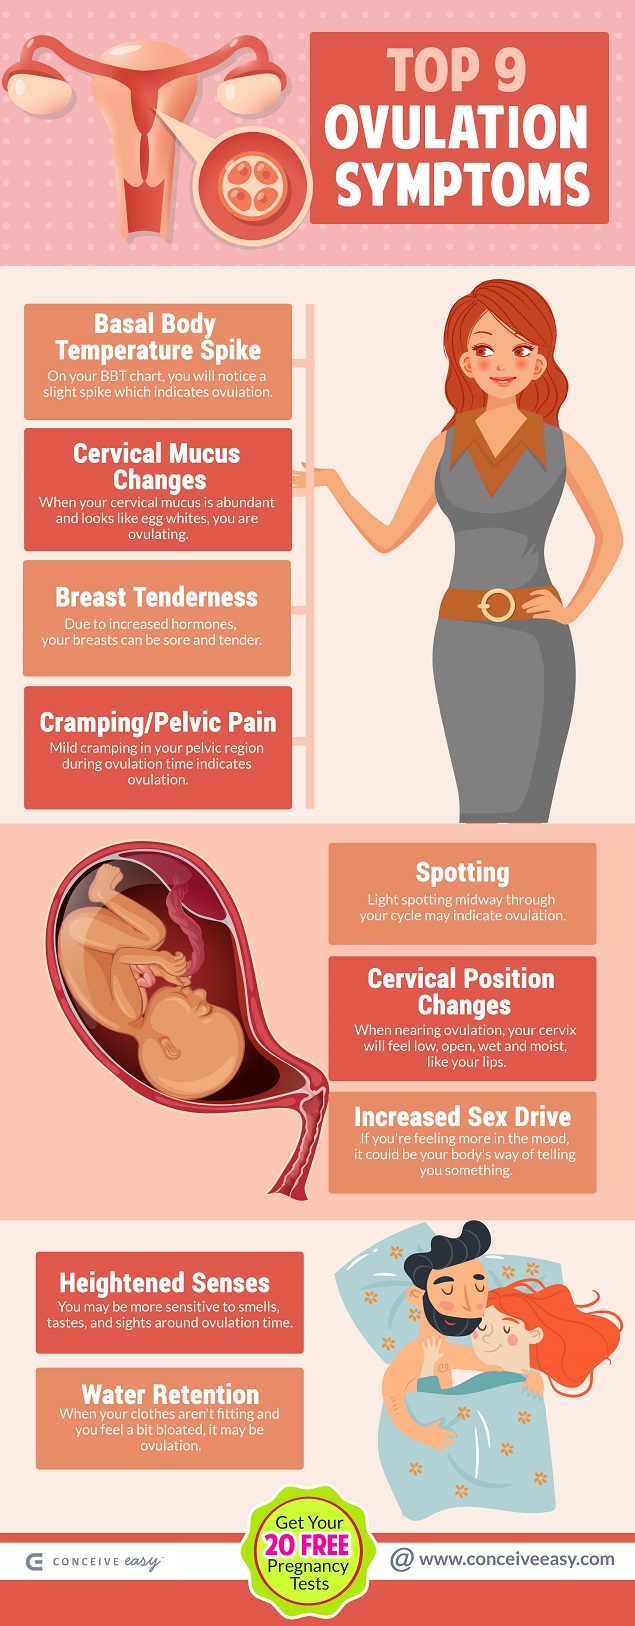 Top 9 Ovulation Symptoms Infographic